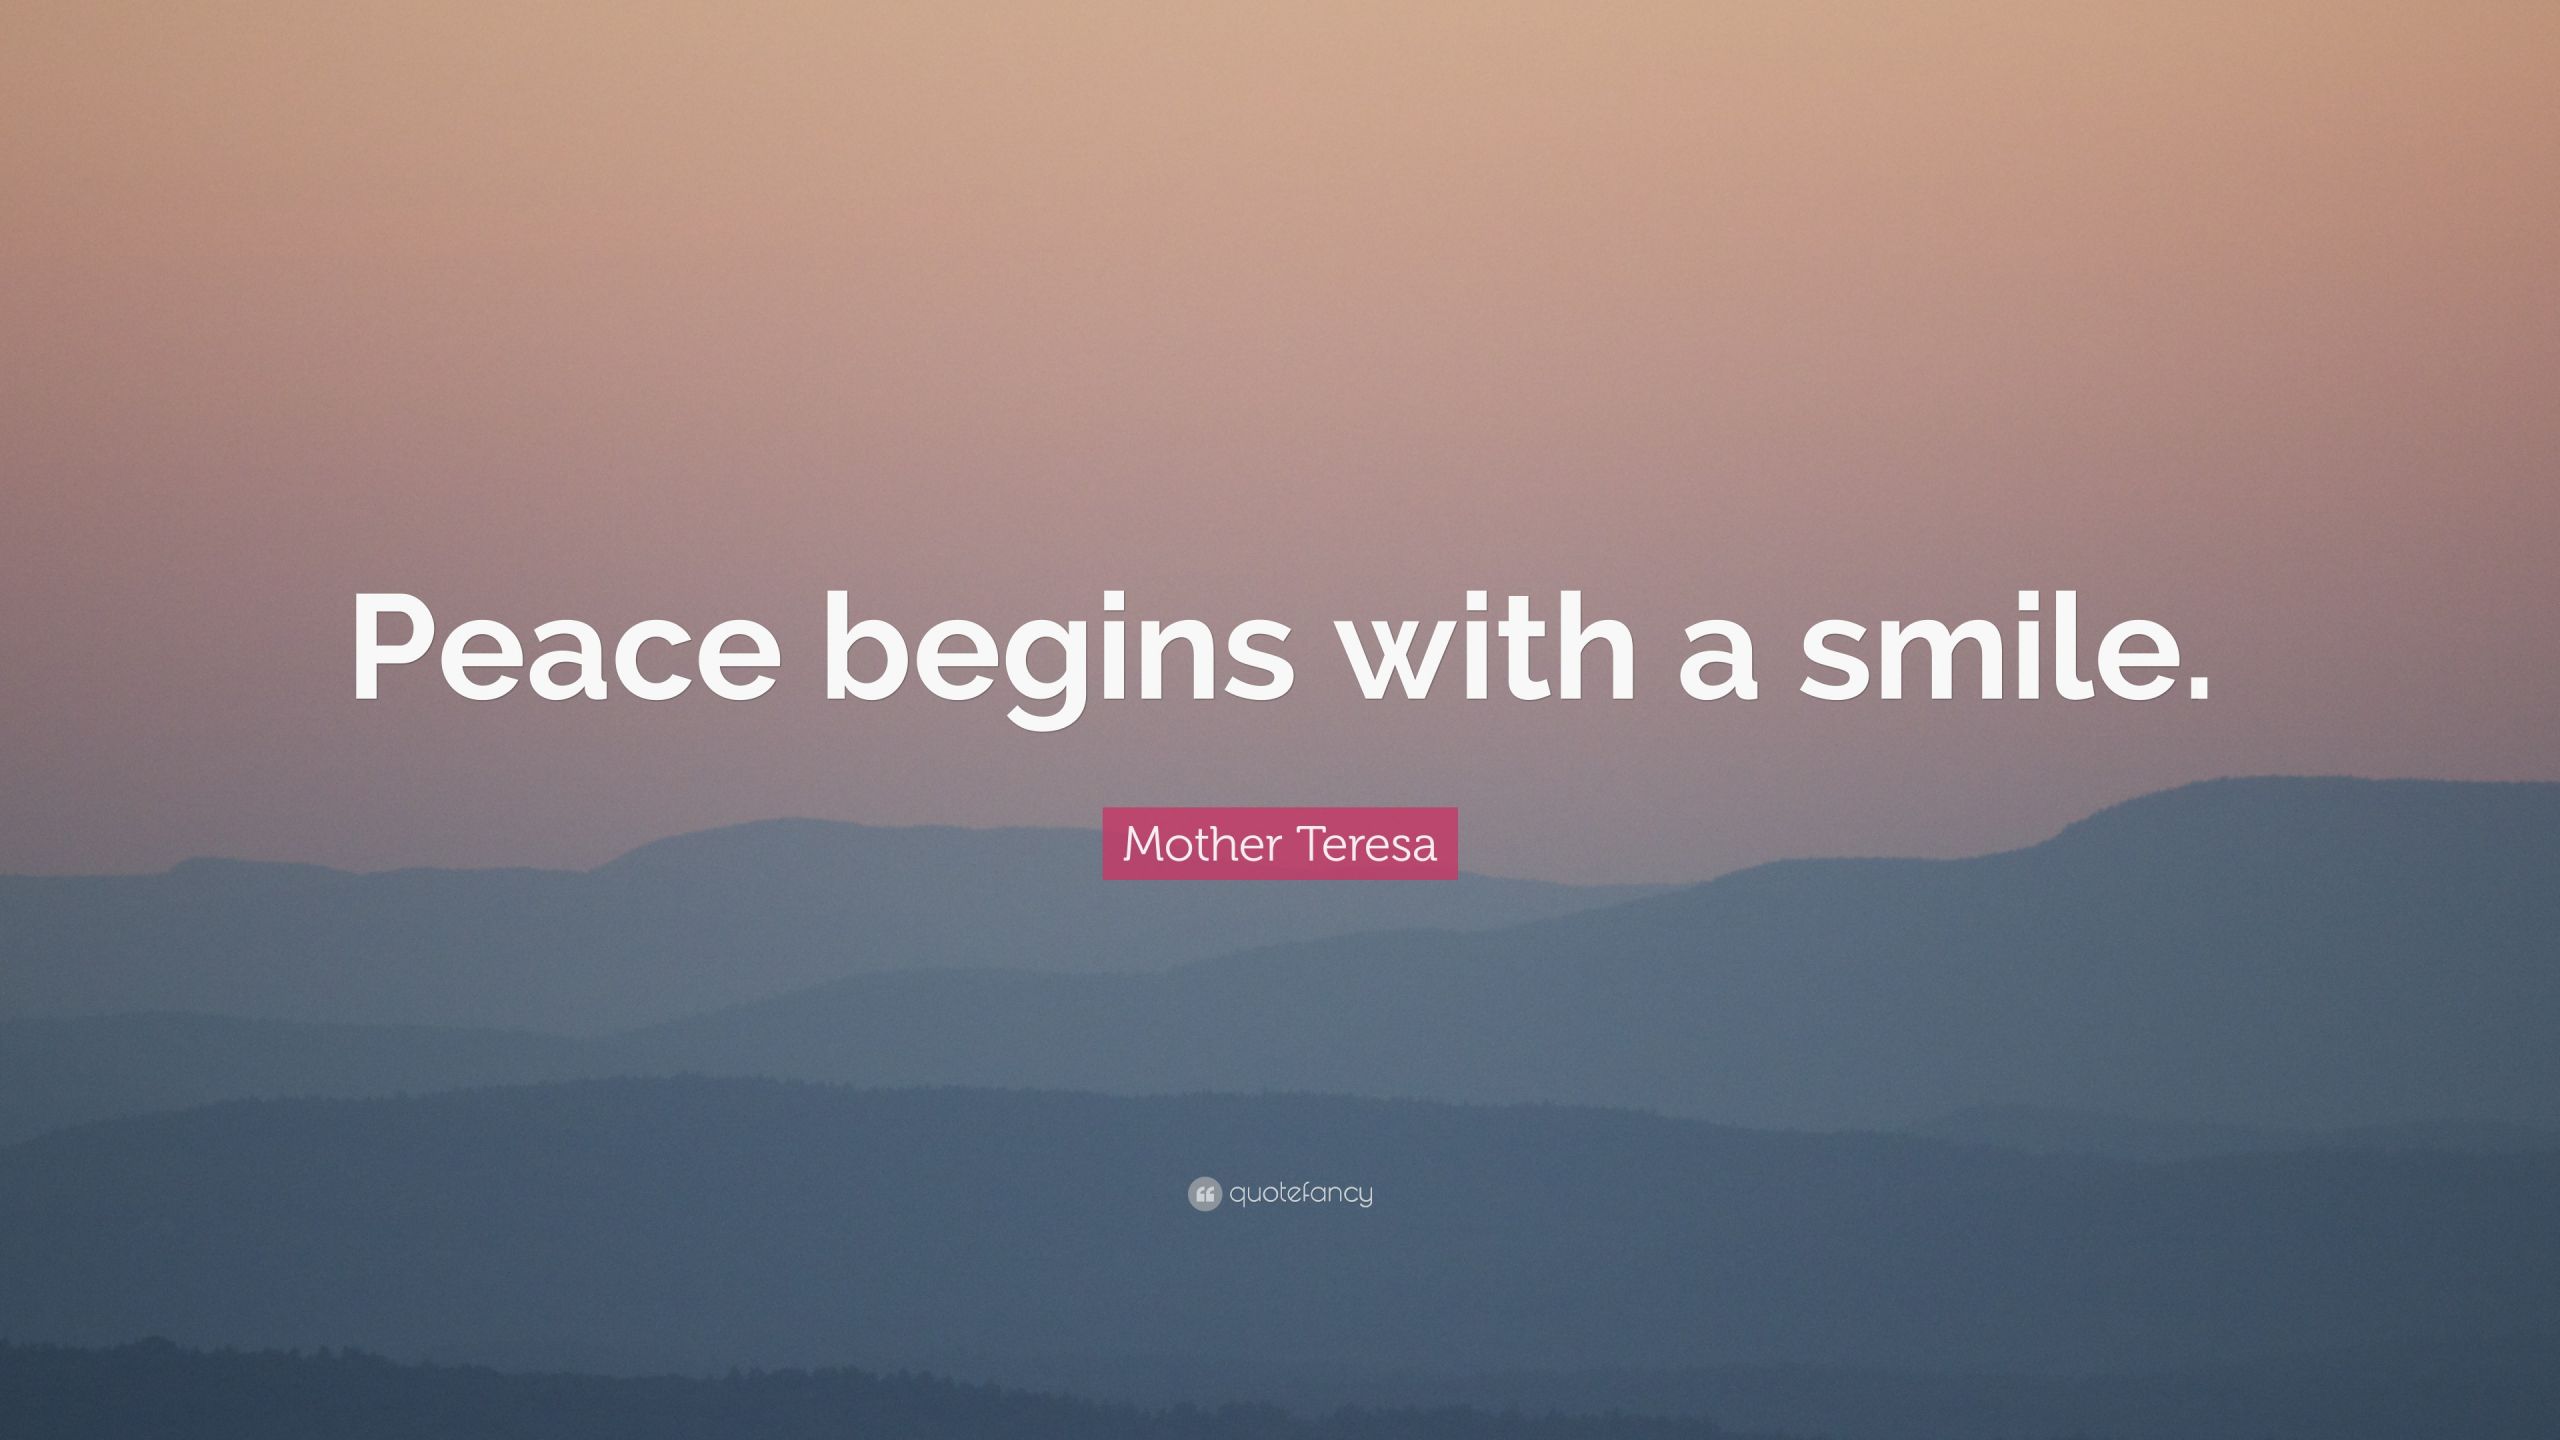 Mother Teresa Peace Quote
 Mother Teresa Quote “Peace begins with a smile ” 25